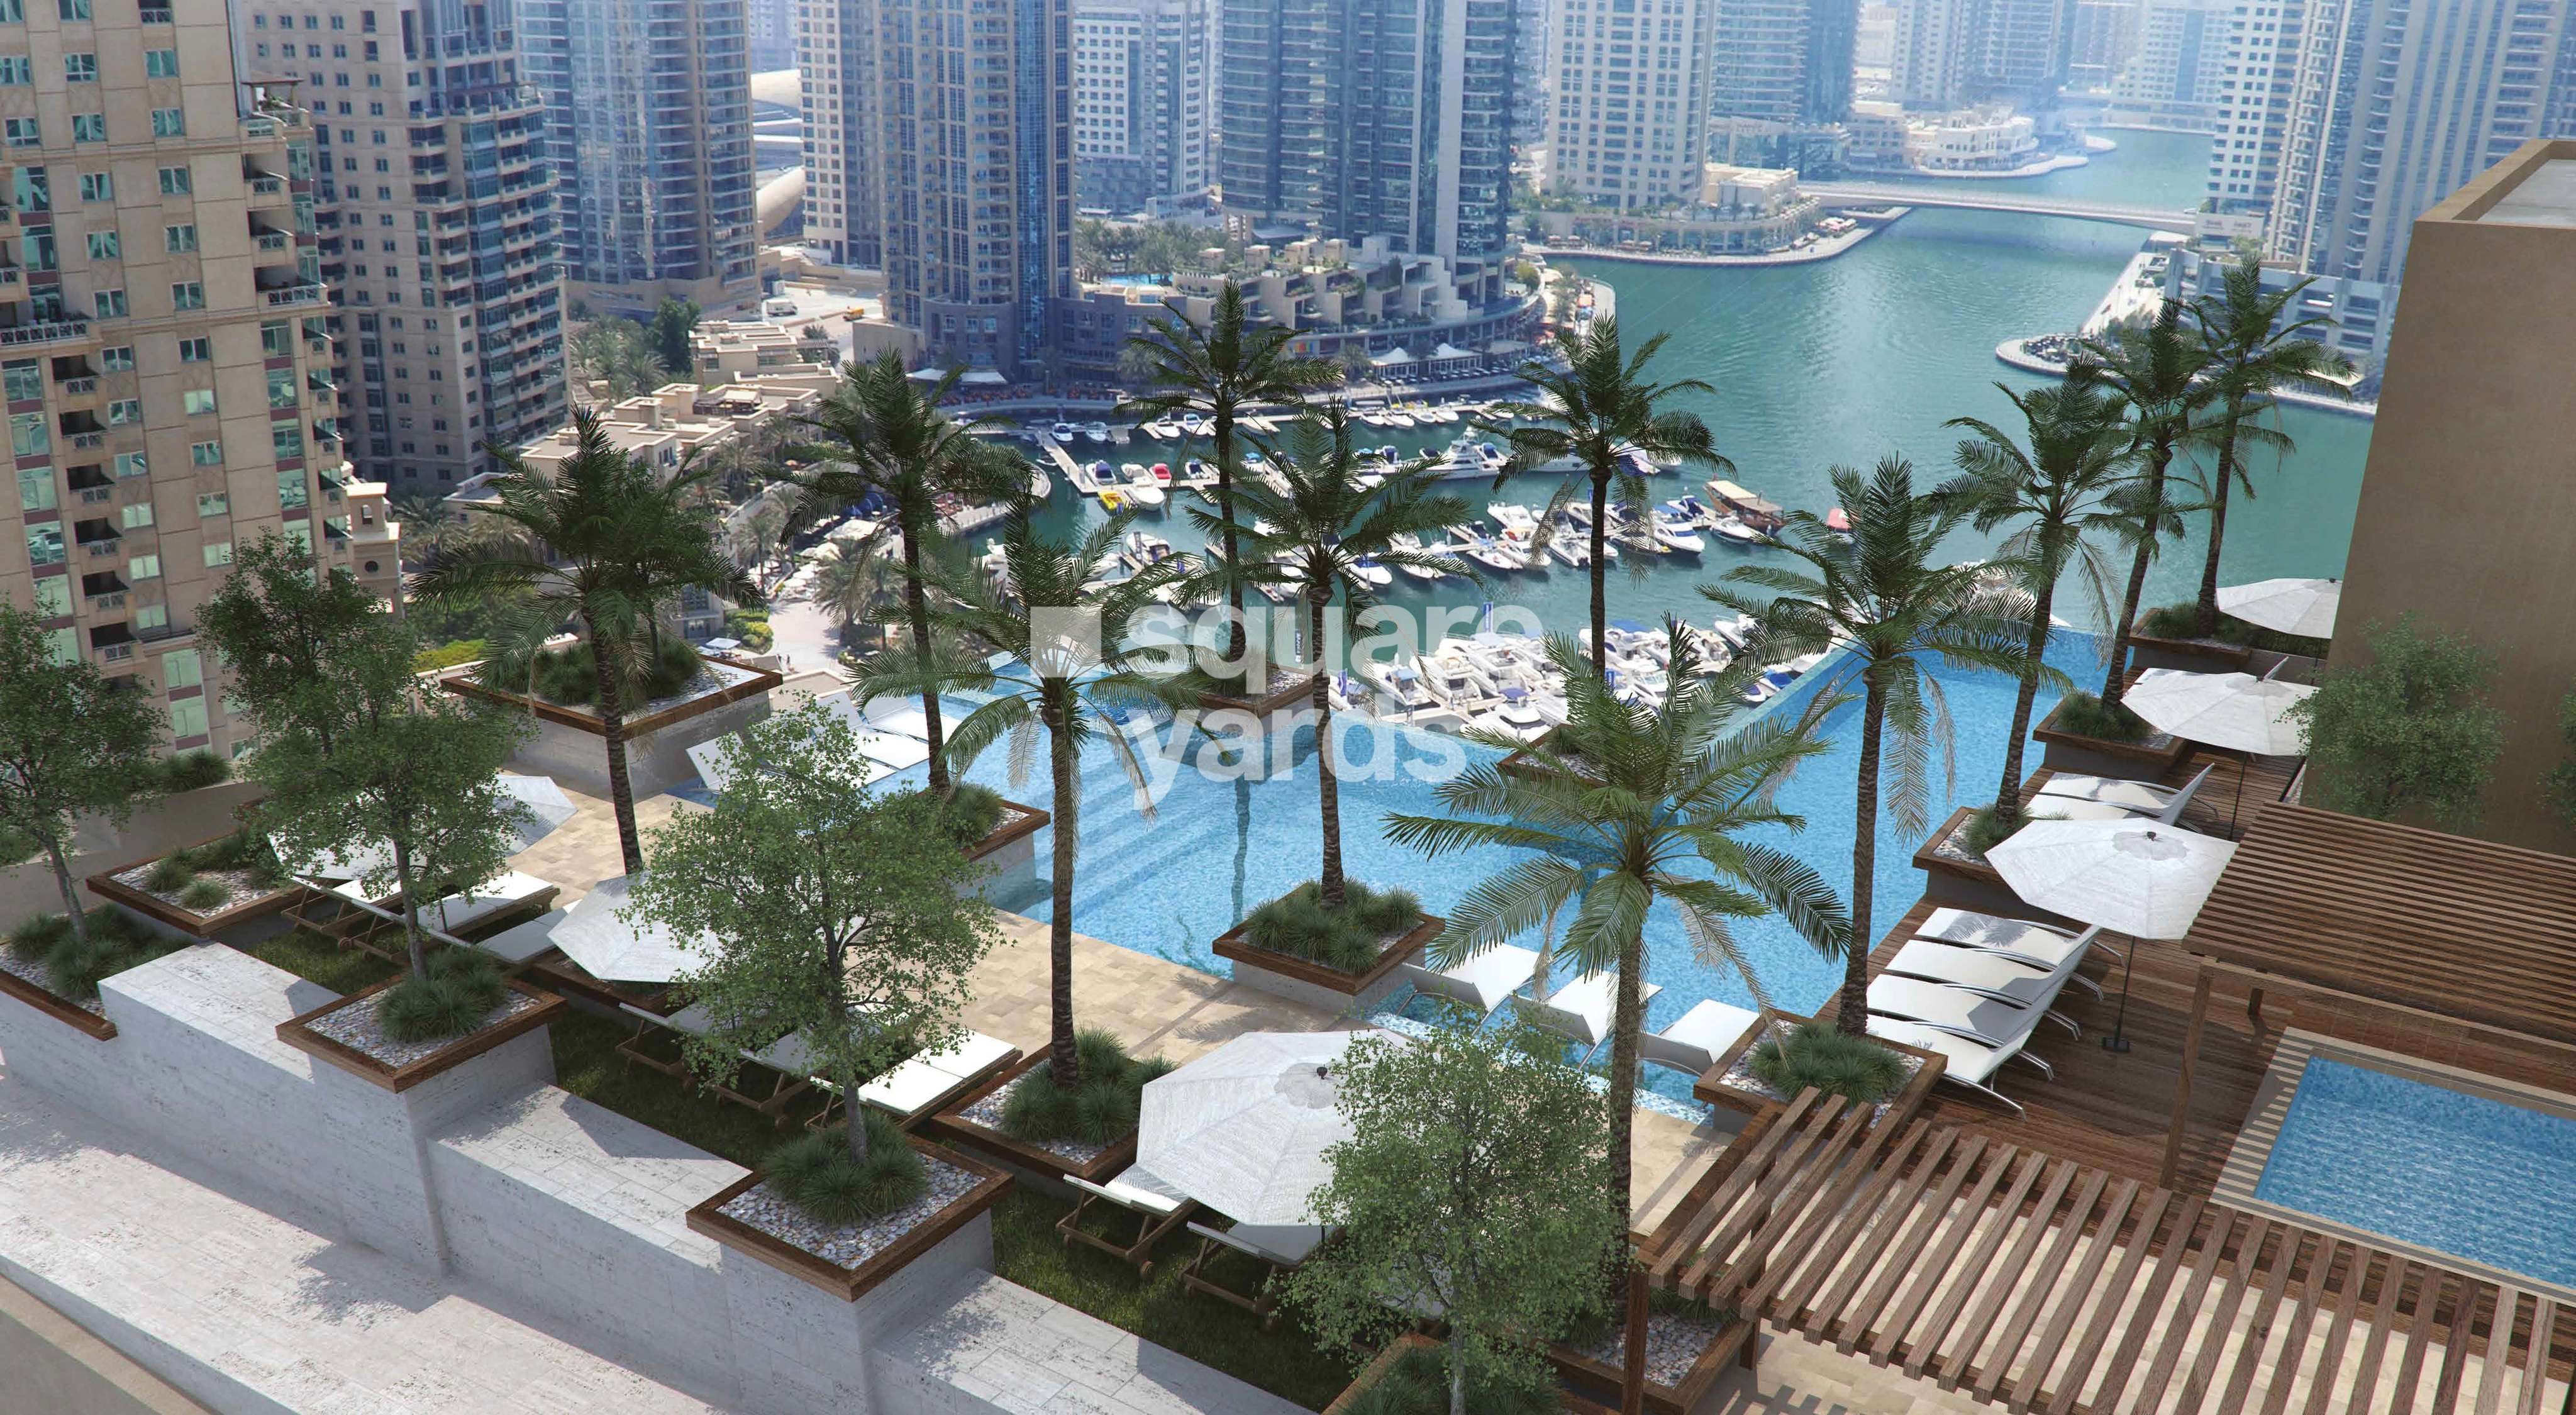 the residences at marina gate 1 project amenities features1